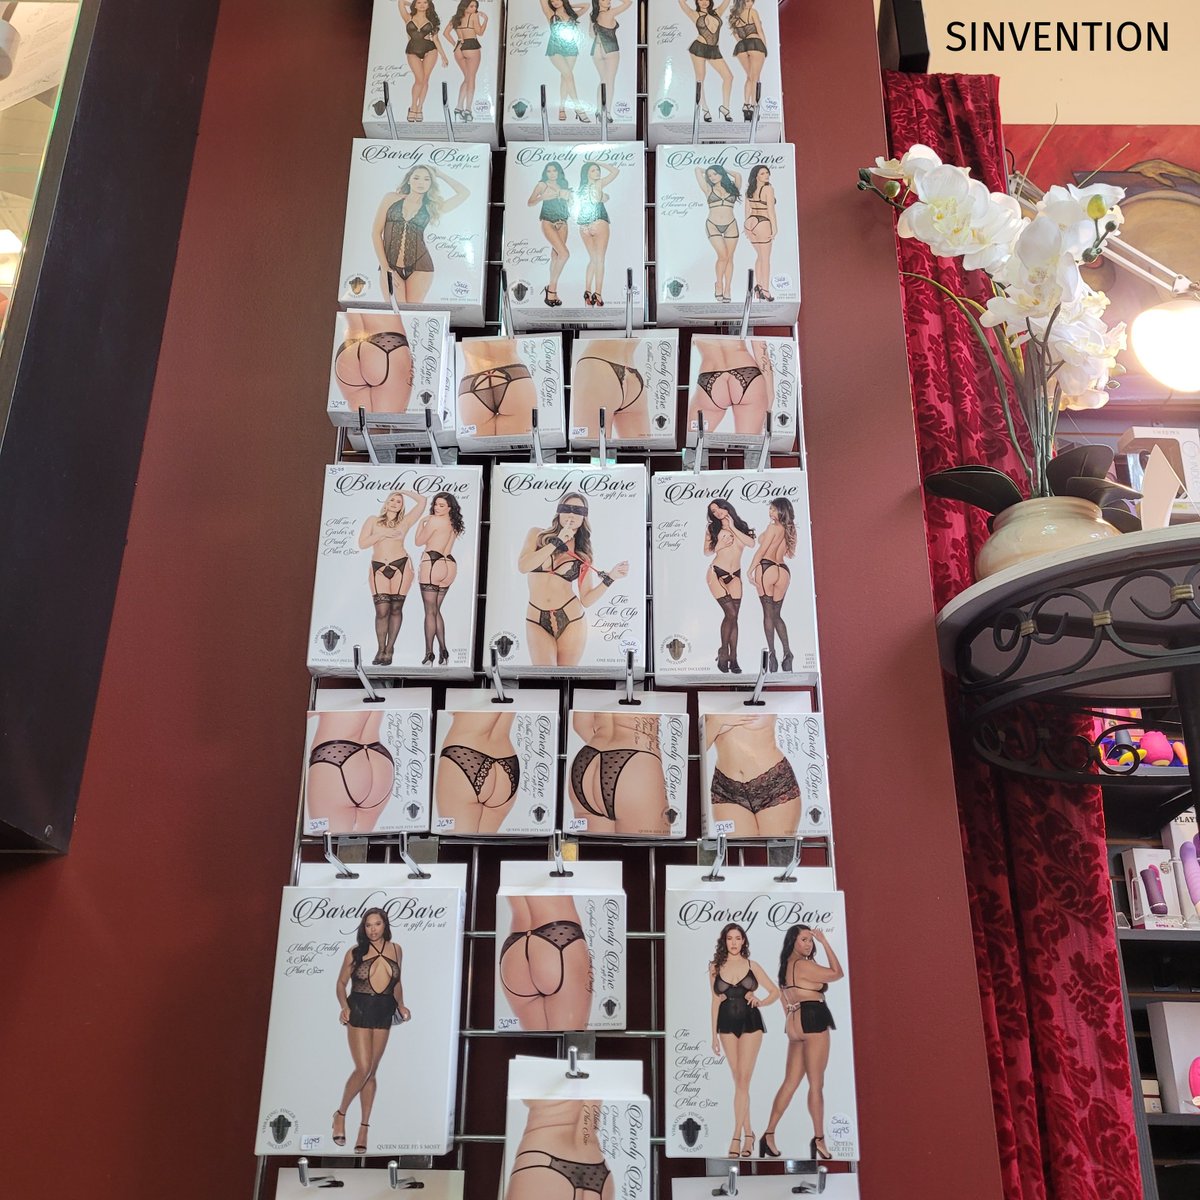 Barely Bare has some very sexy underthings...... . #lingerie #panties #sexy #adultstore #StratfordON . churchofsinvention.com/lingerie